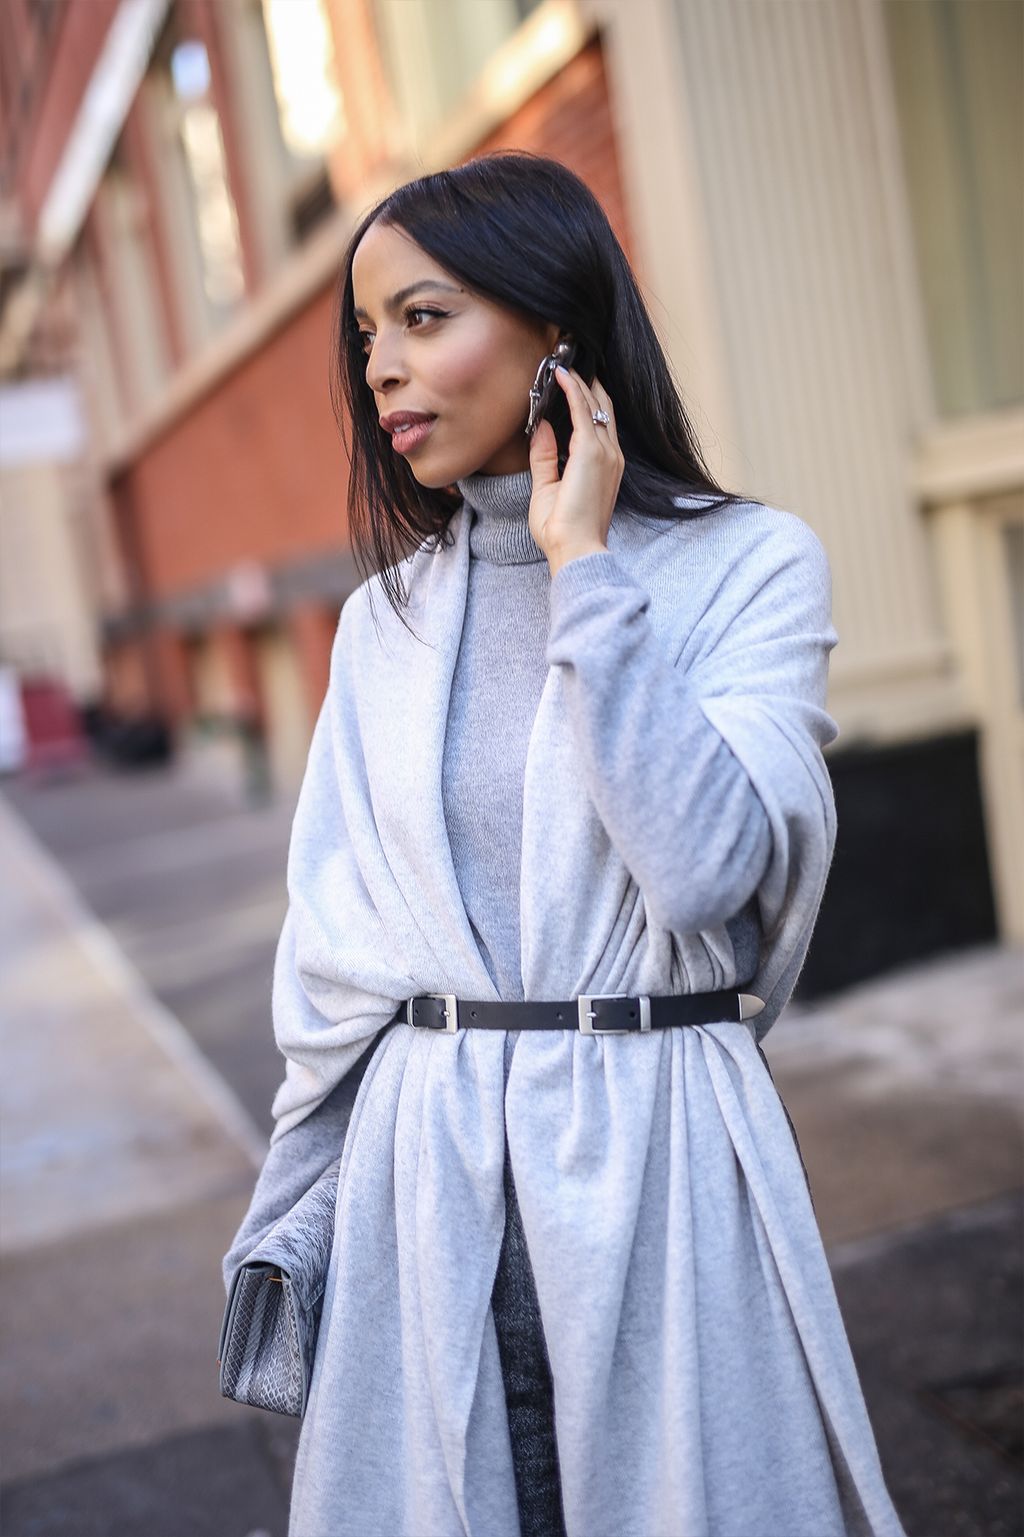 Casual Holiday Party Outfit Ideas That Aren't Boring | Who What Wear